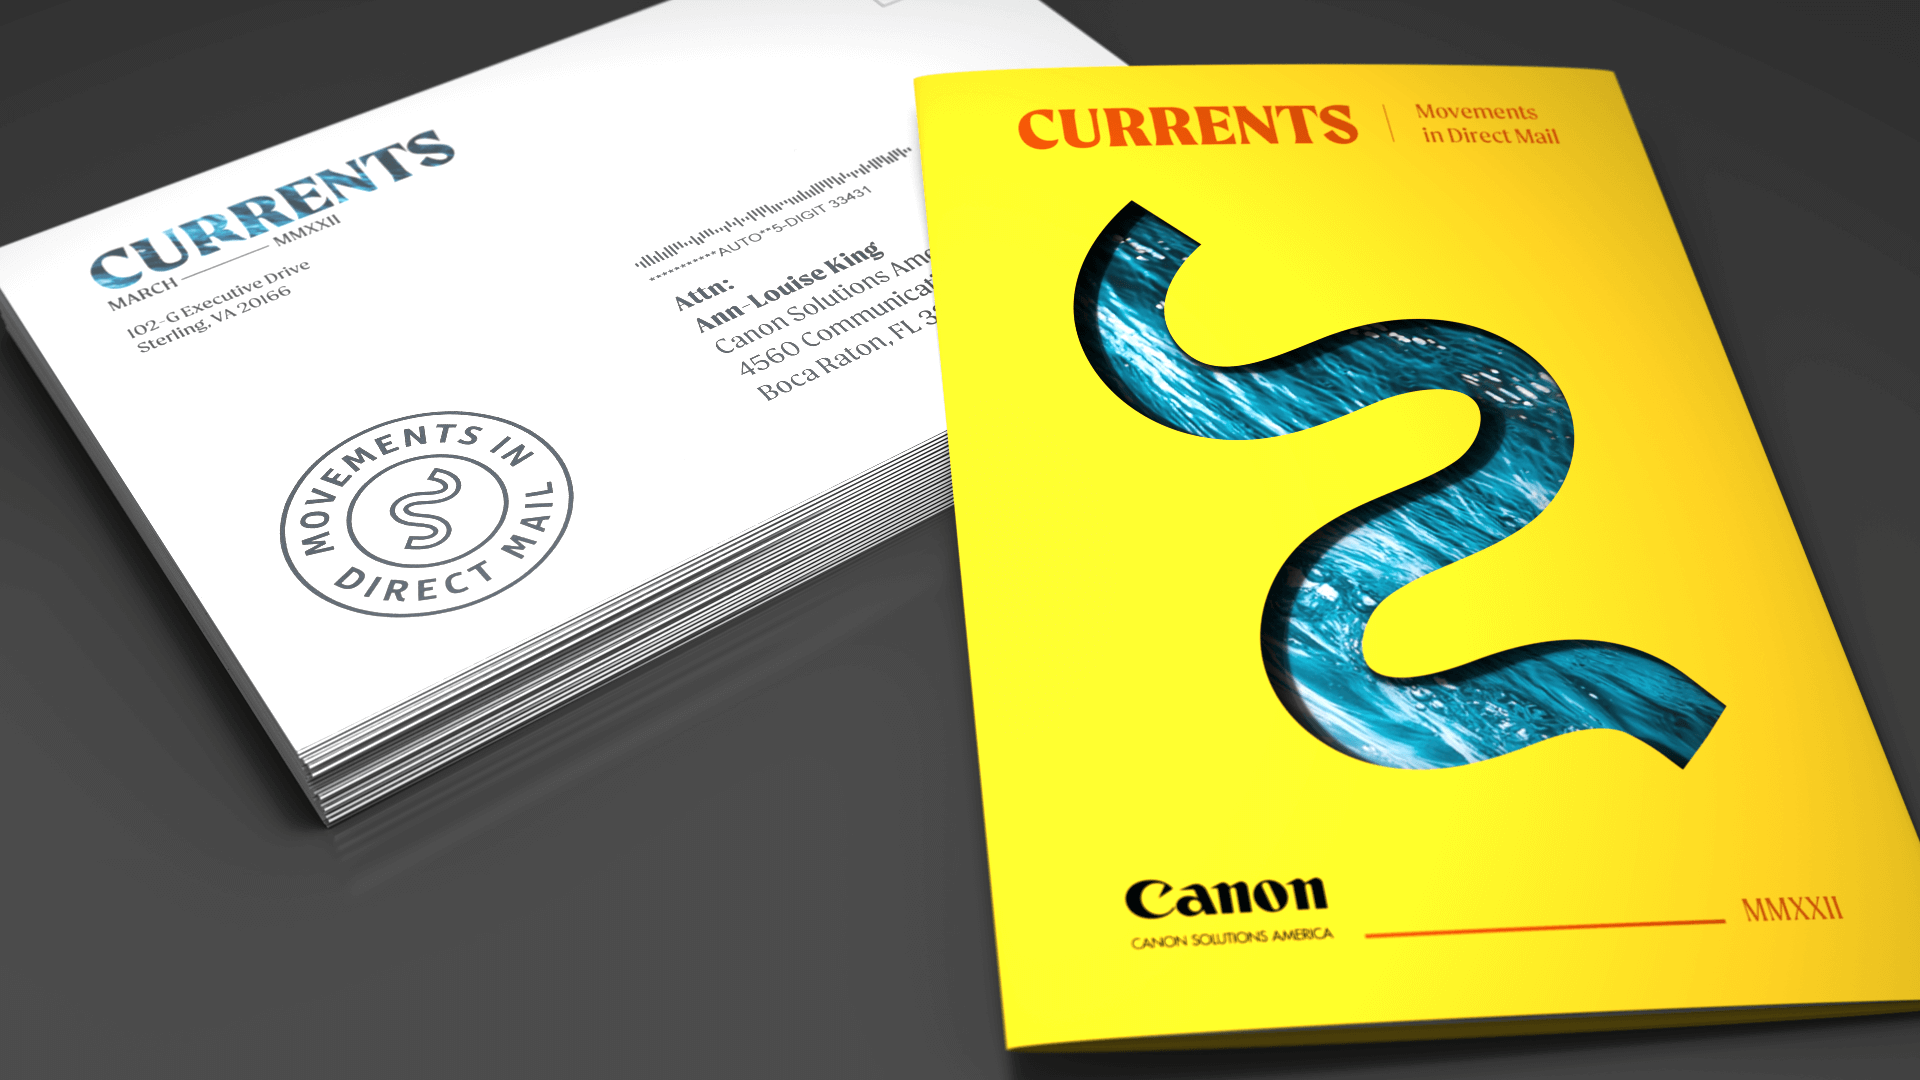 Project Spotlight: An Editorial Approach Helps Demonstrate Current Trends in Direct Mail image